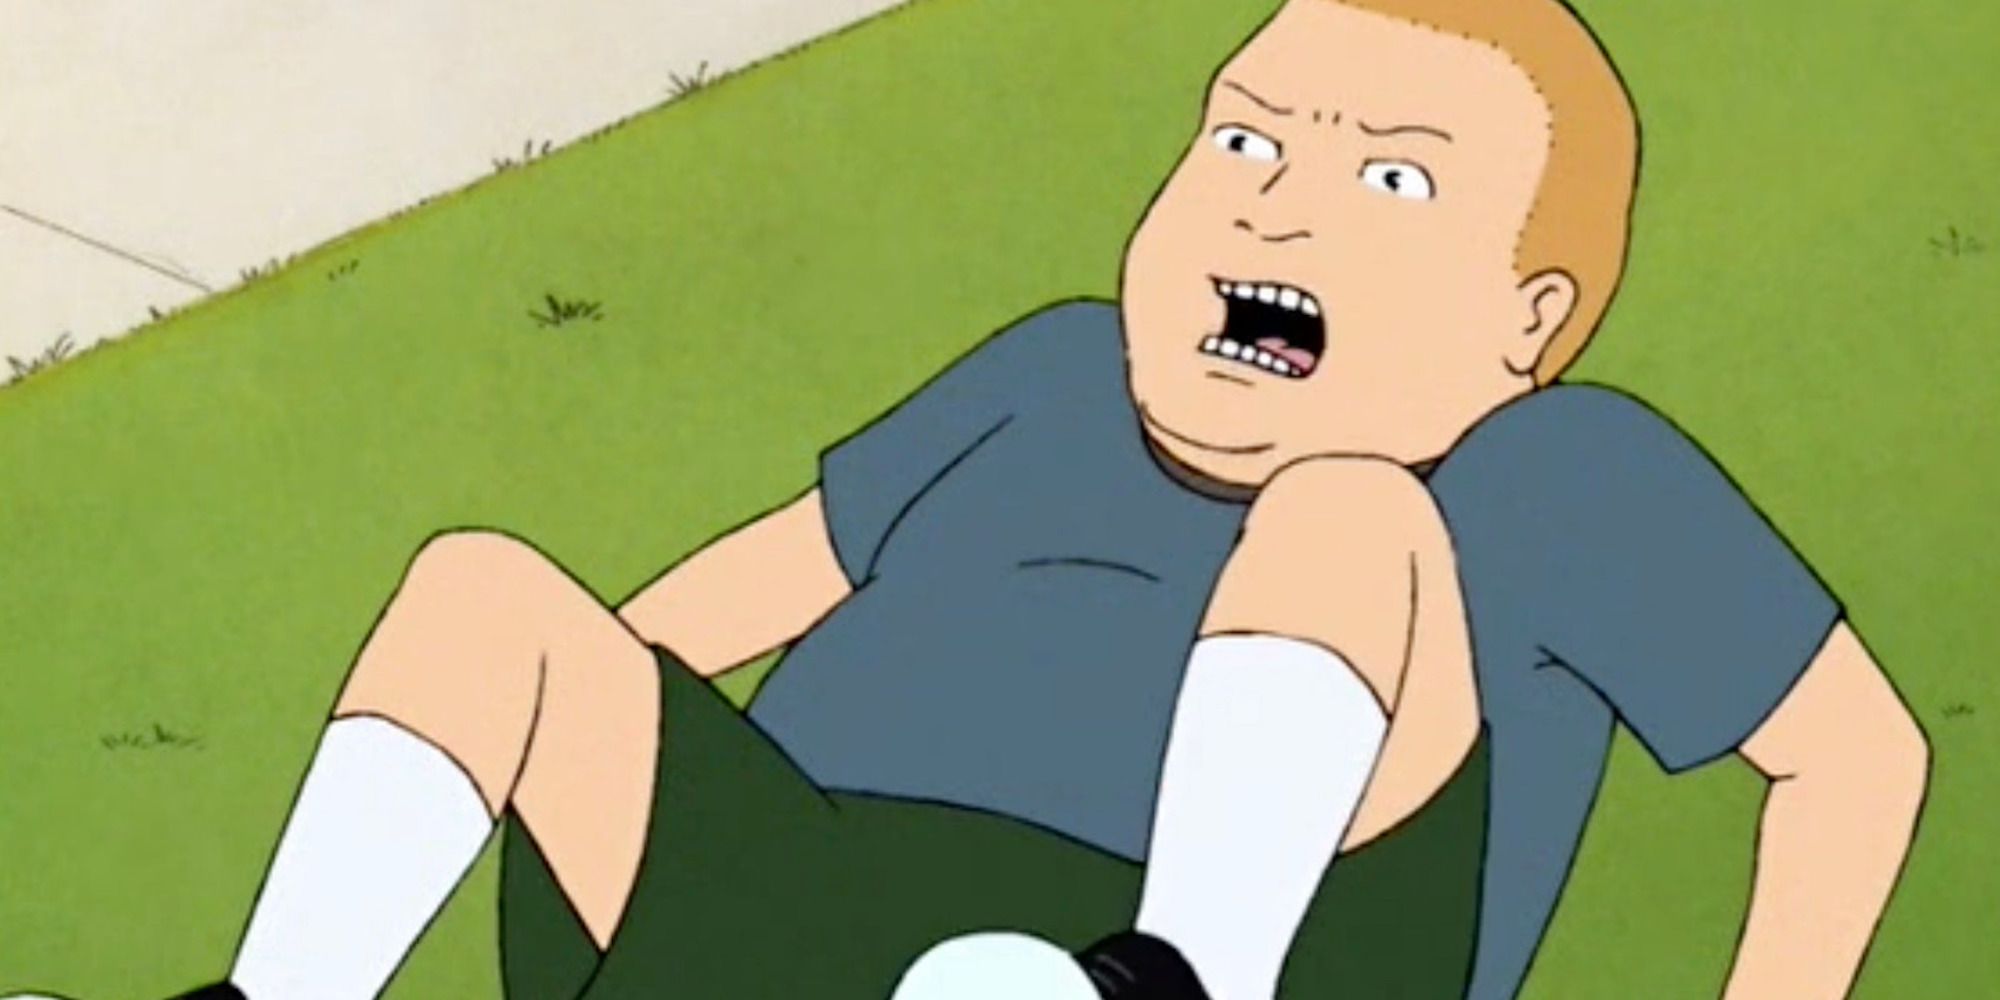 Bobby from King of the Hill